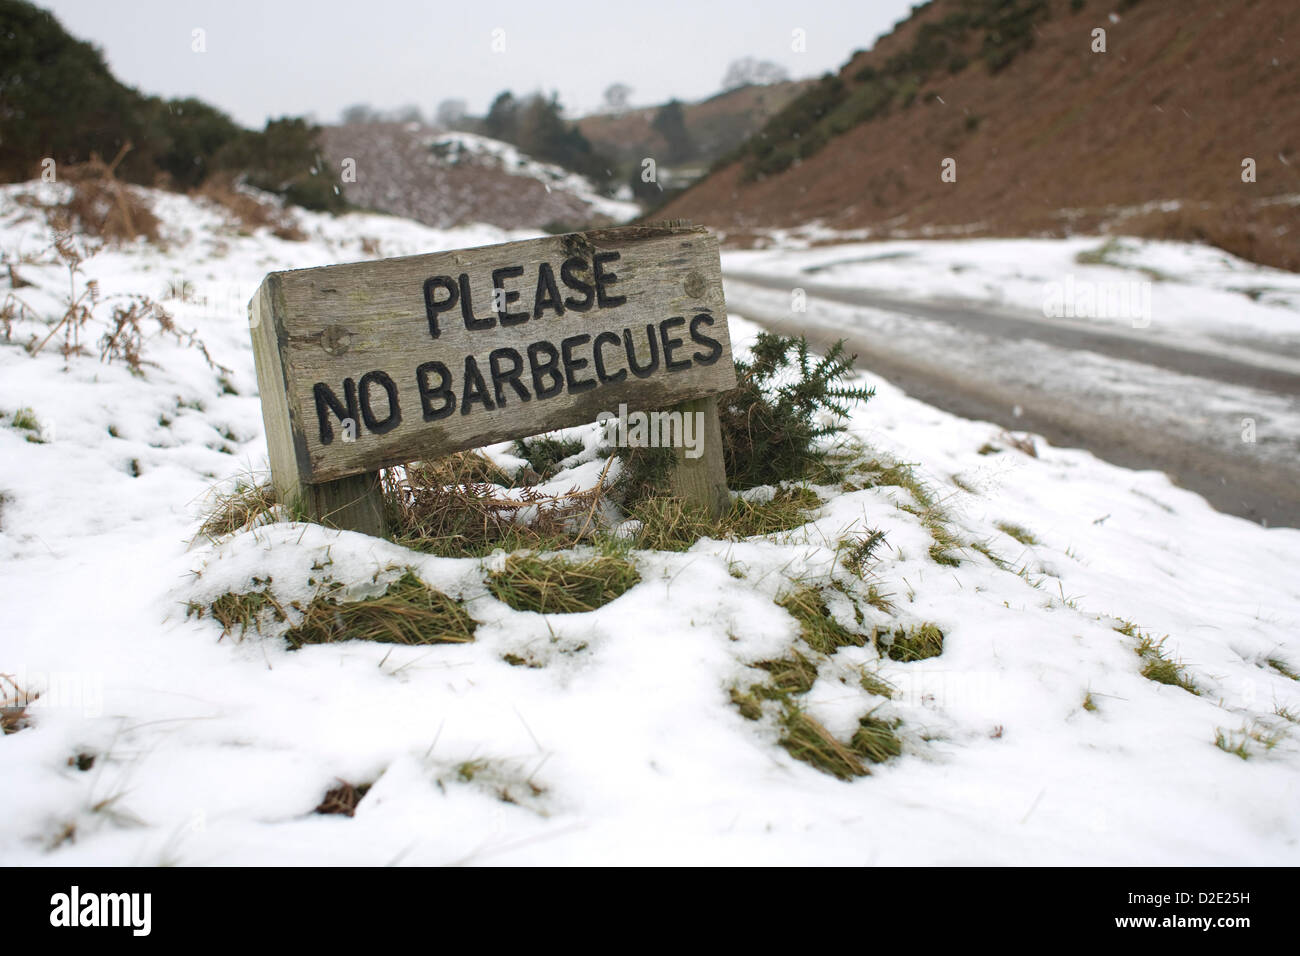 In the Shropshire countryside, January 21st, 2013. Wooden sign saying 'PLEASE NO BARBECUES' looks very out of place in the snow! Stock Photo